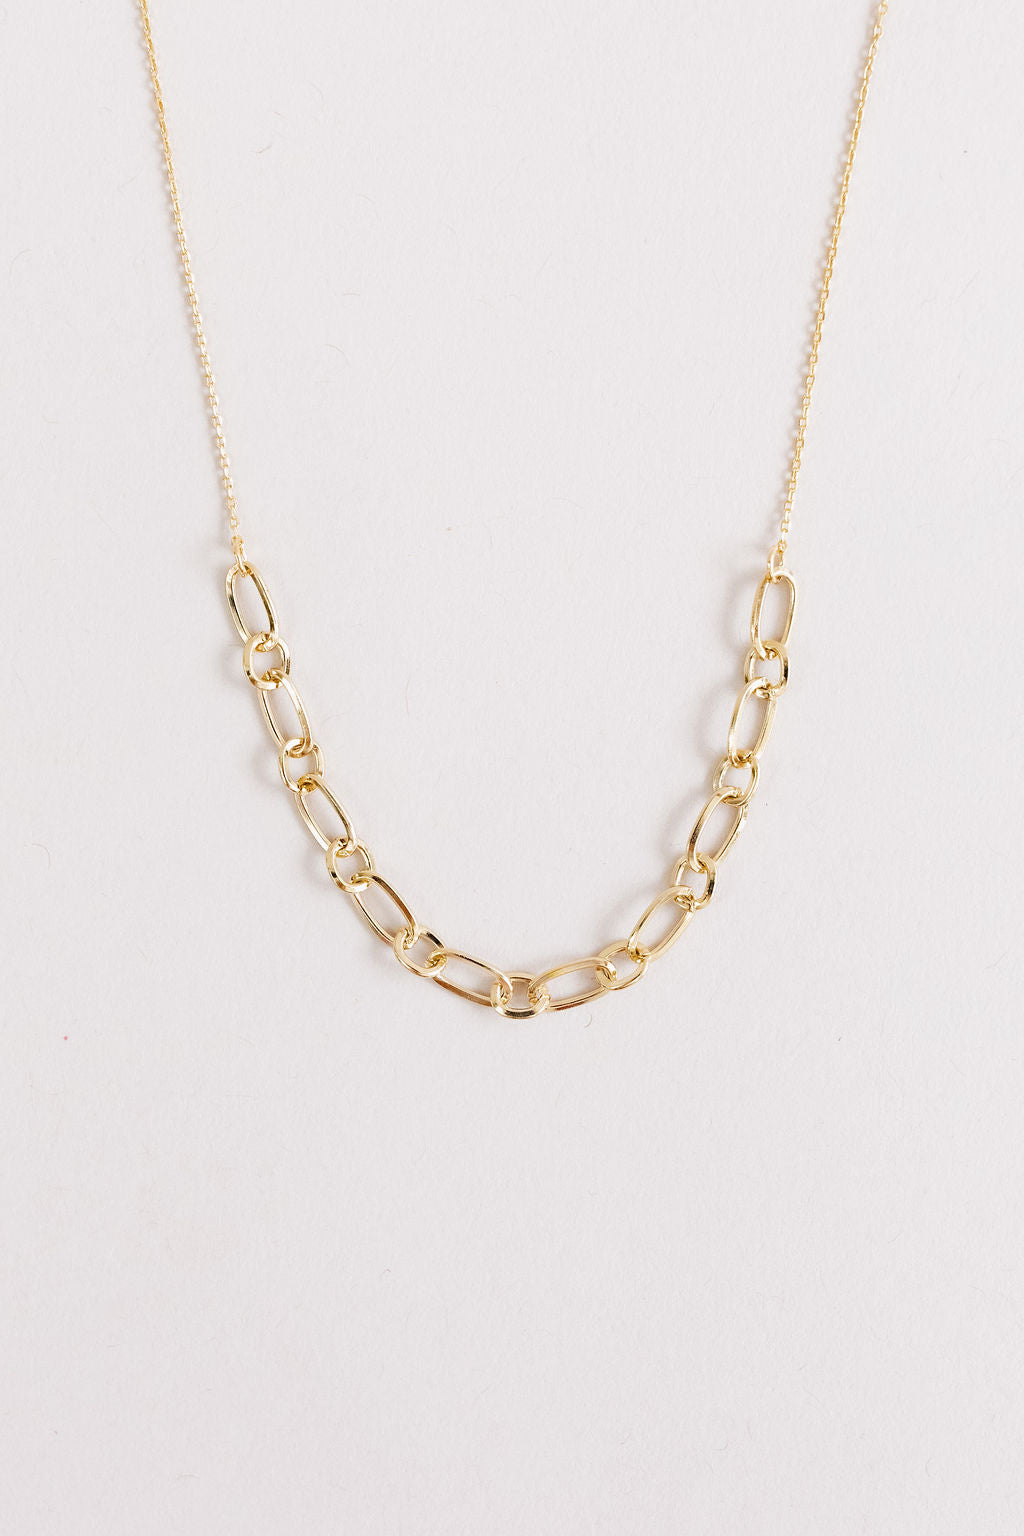 Half Chain Oval Link Necklace | Assorted - Poppy and Stella